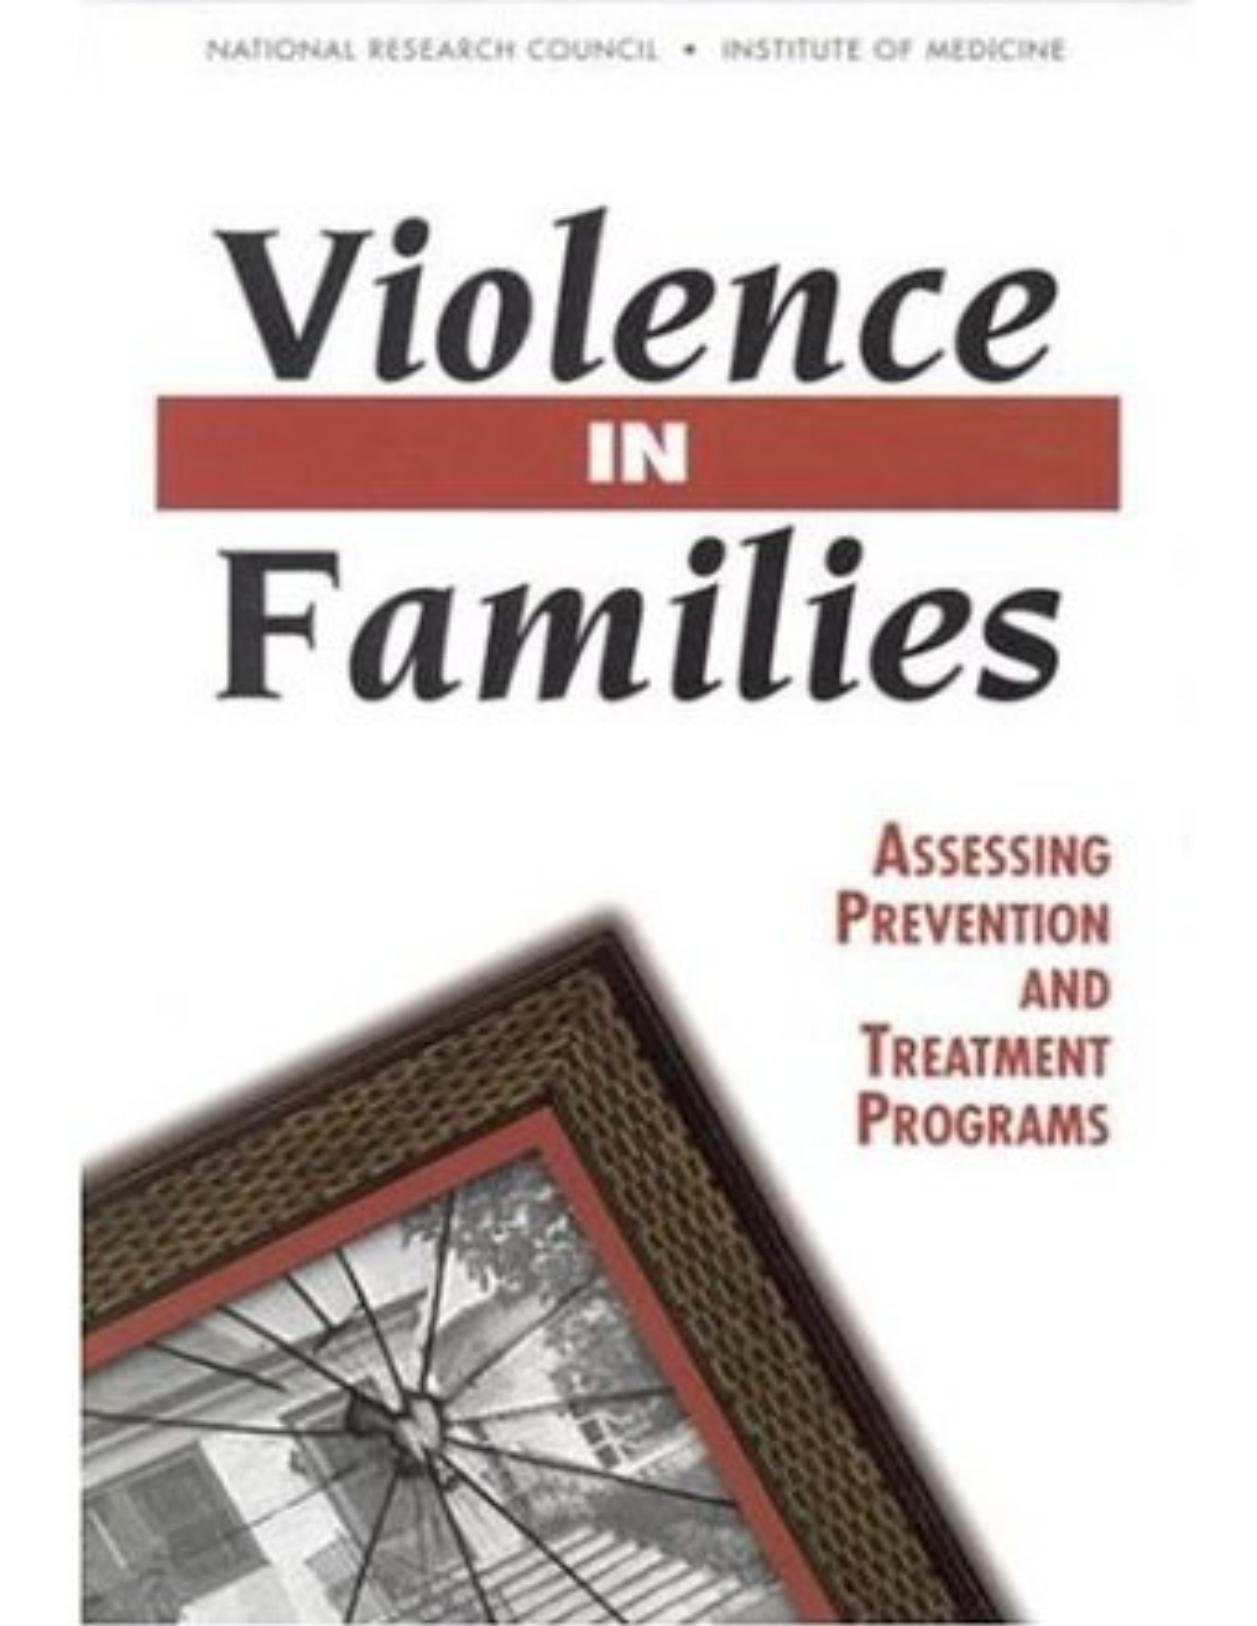 Violence in Families  Assessing Prevention and Treatment Programs ( PDFDrive.com )